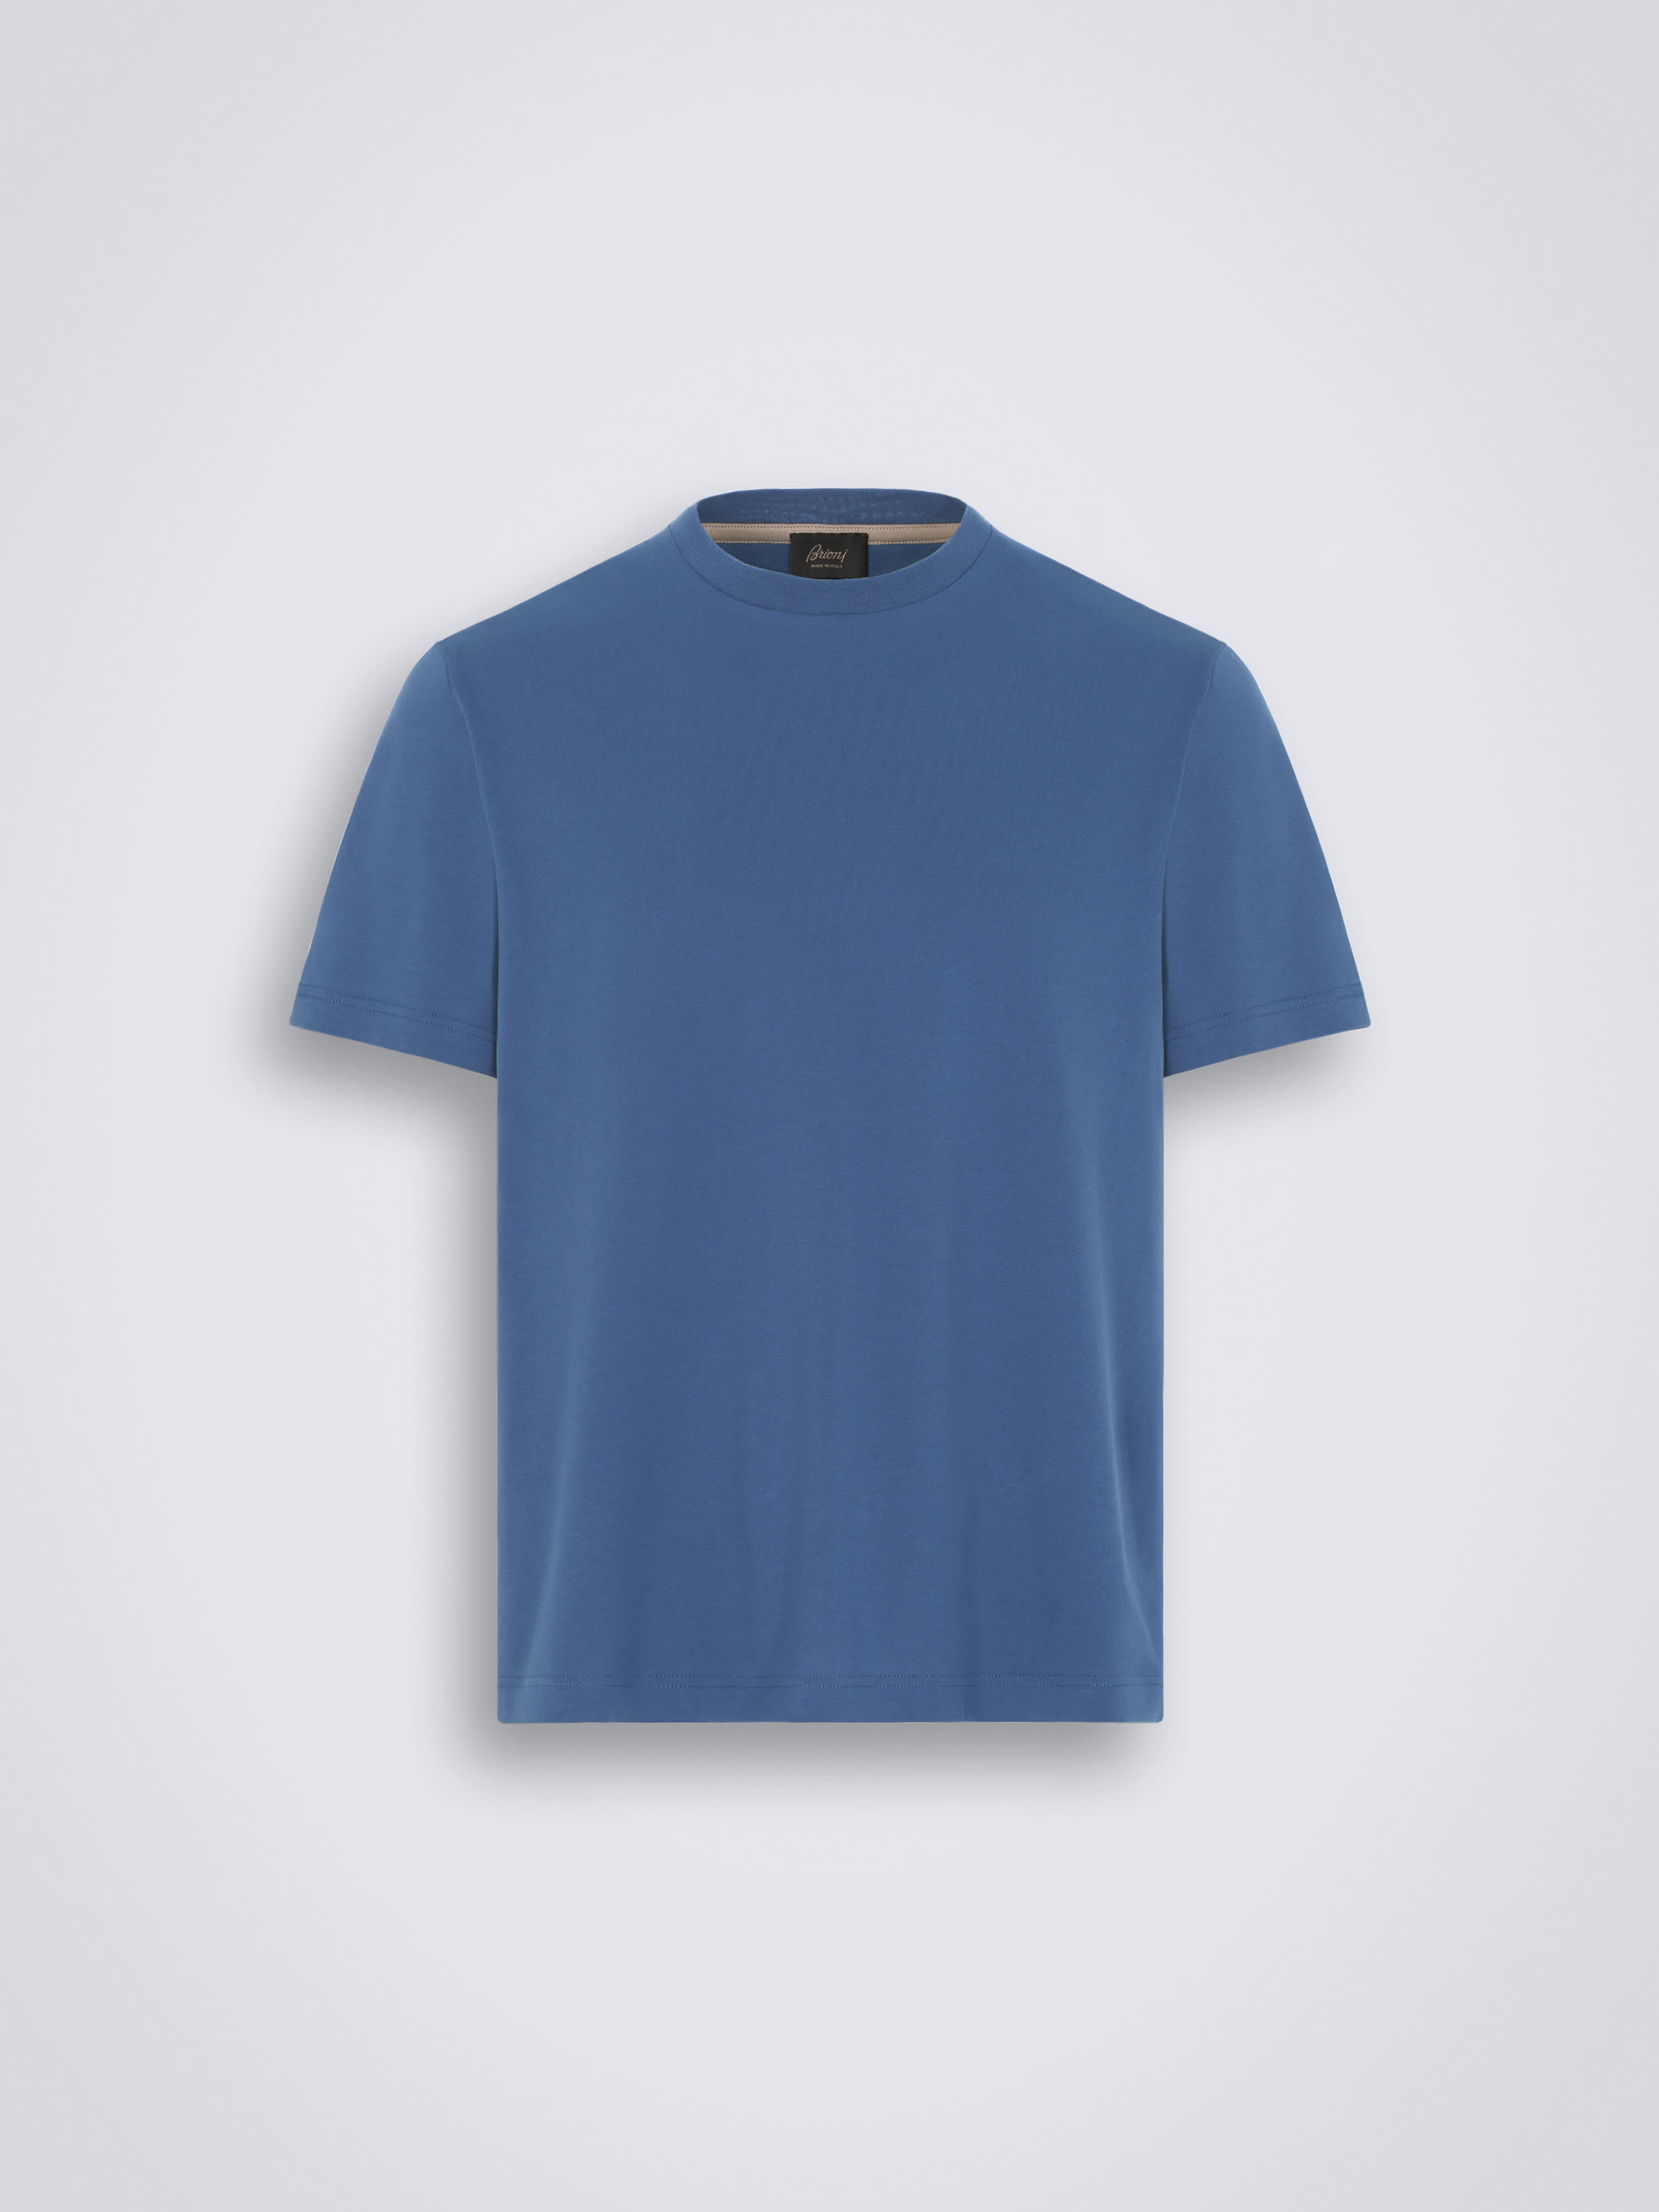 Steel blue gassed cotton | Brioni® Official Store